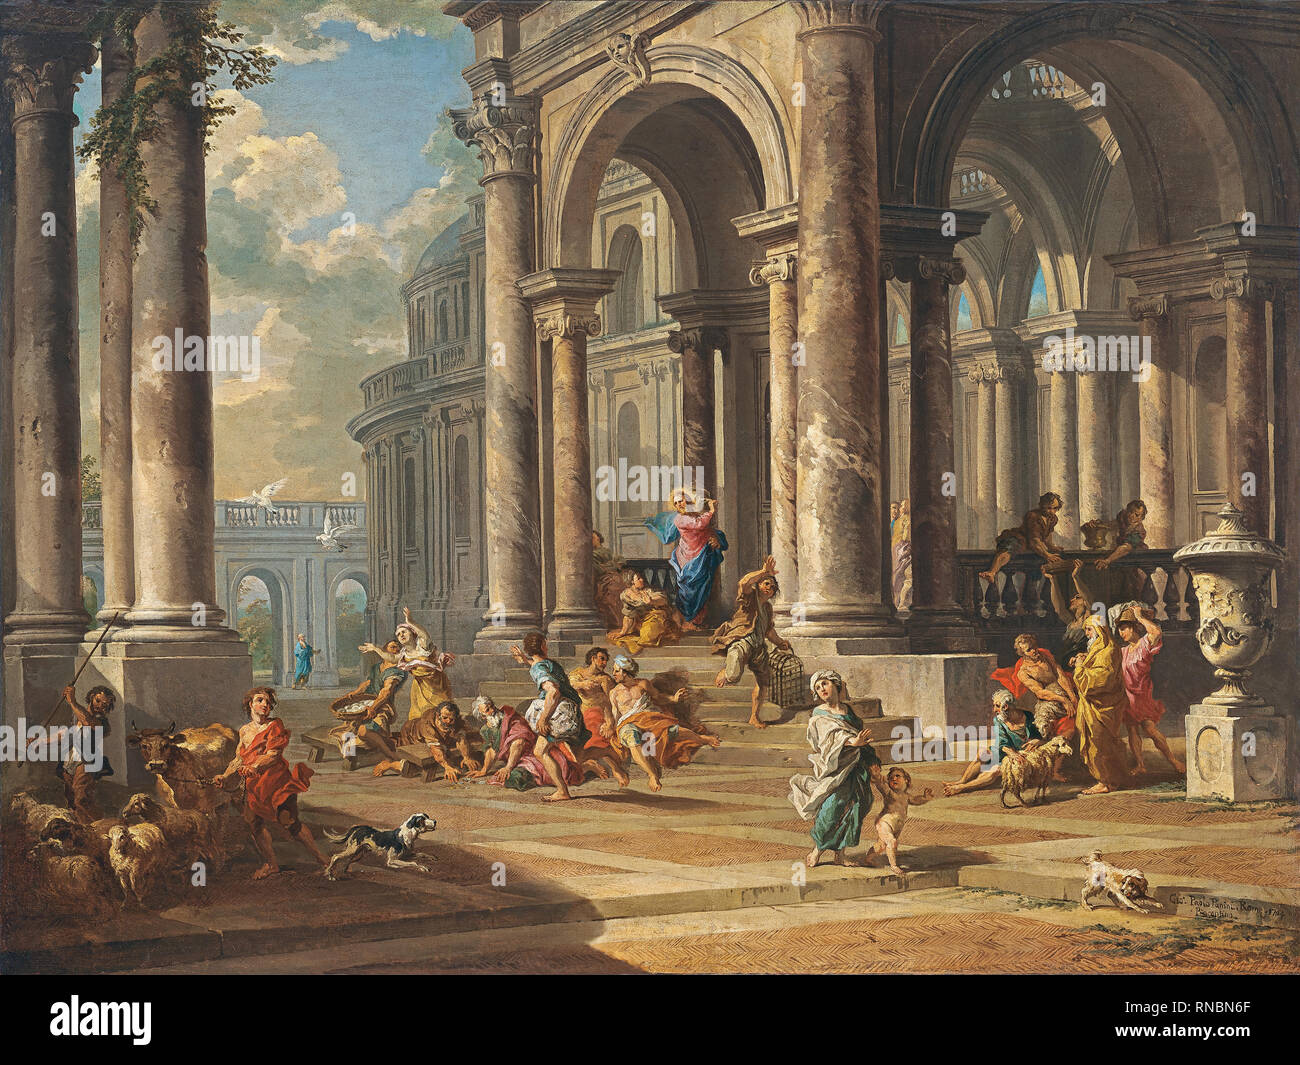 Gian Paolo Panini (Piacenza, 169-Rome, 1765). The Expulsion of the Money-changers from the Temple (1724). Oil on canvas. 73.2 x 98.4 cm. Museum: Museo Nacional Thyssen-Bornemisza, Madrid. Author: Panini, Gian Paolo. PANINI, GIOVANNI PAOLO. Stock Photo